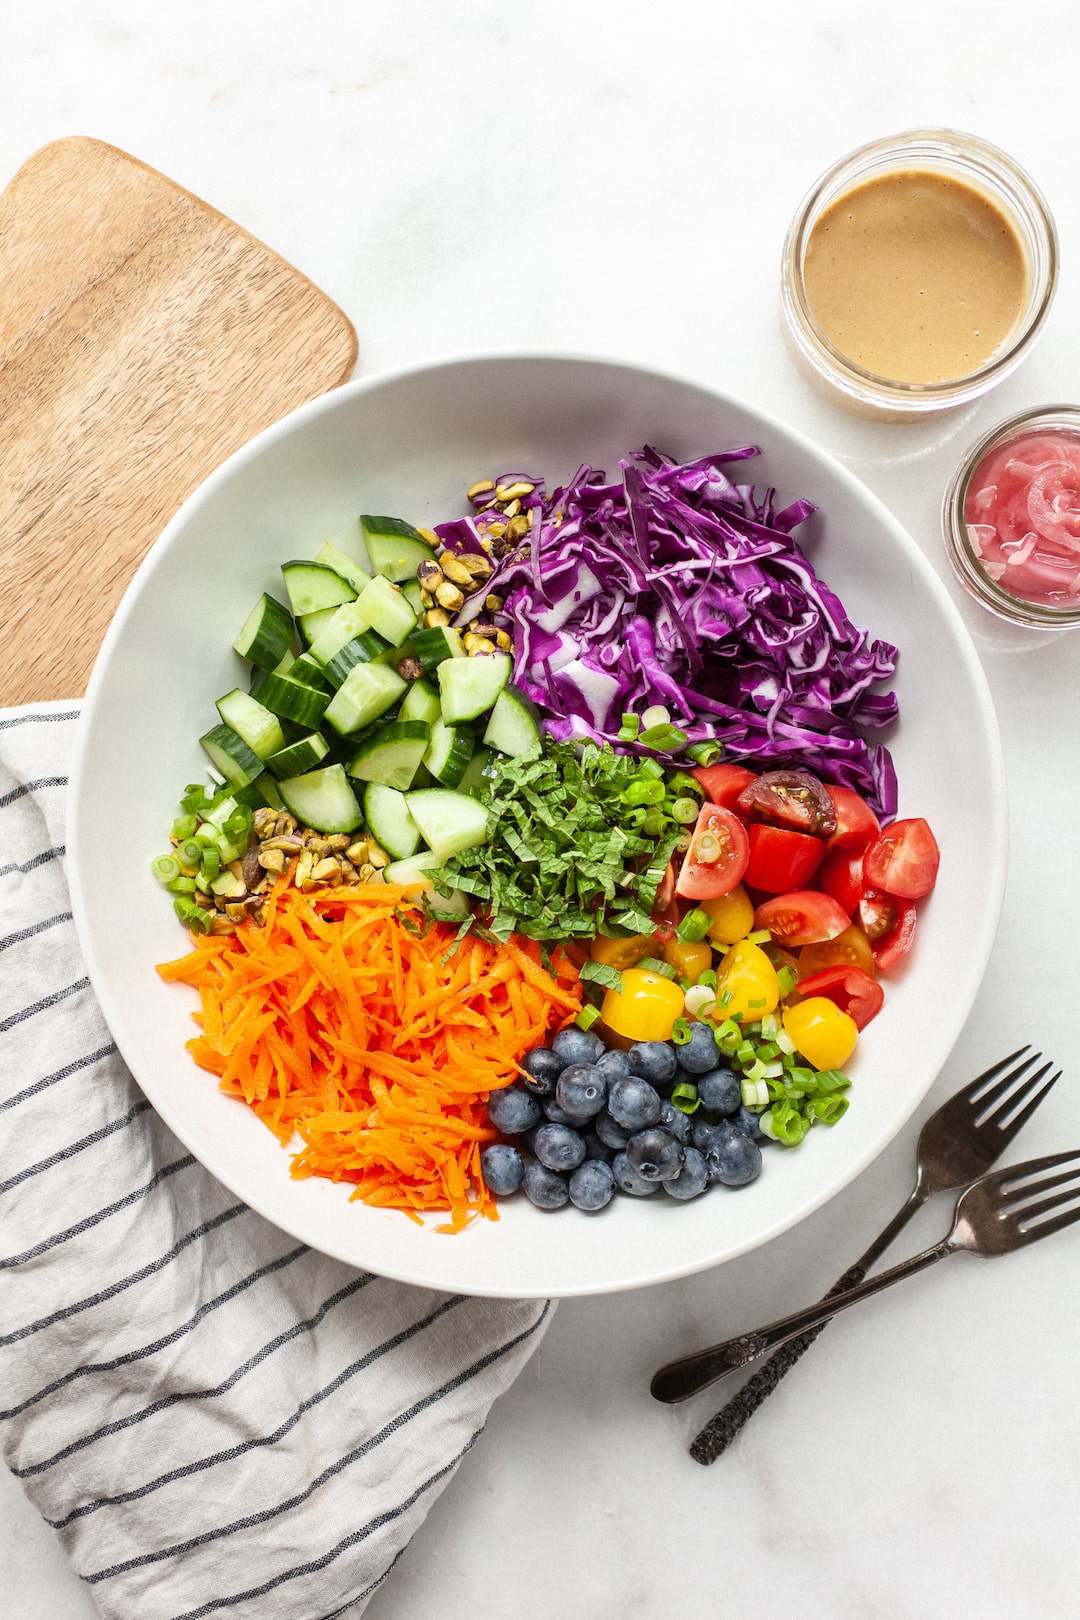 bowl of colourful vegetables including cabbage, cucumber, carrots, and tomatoes